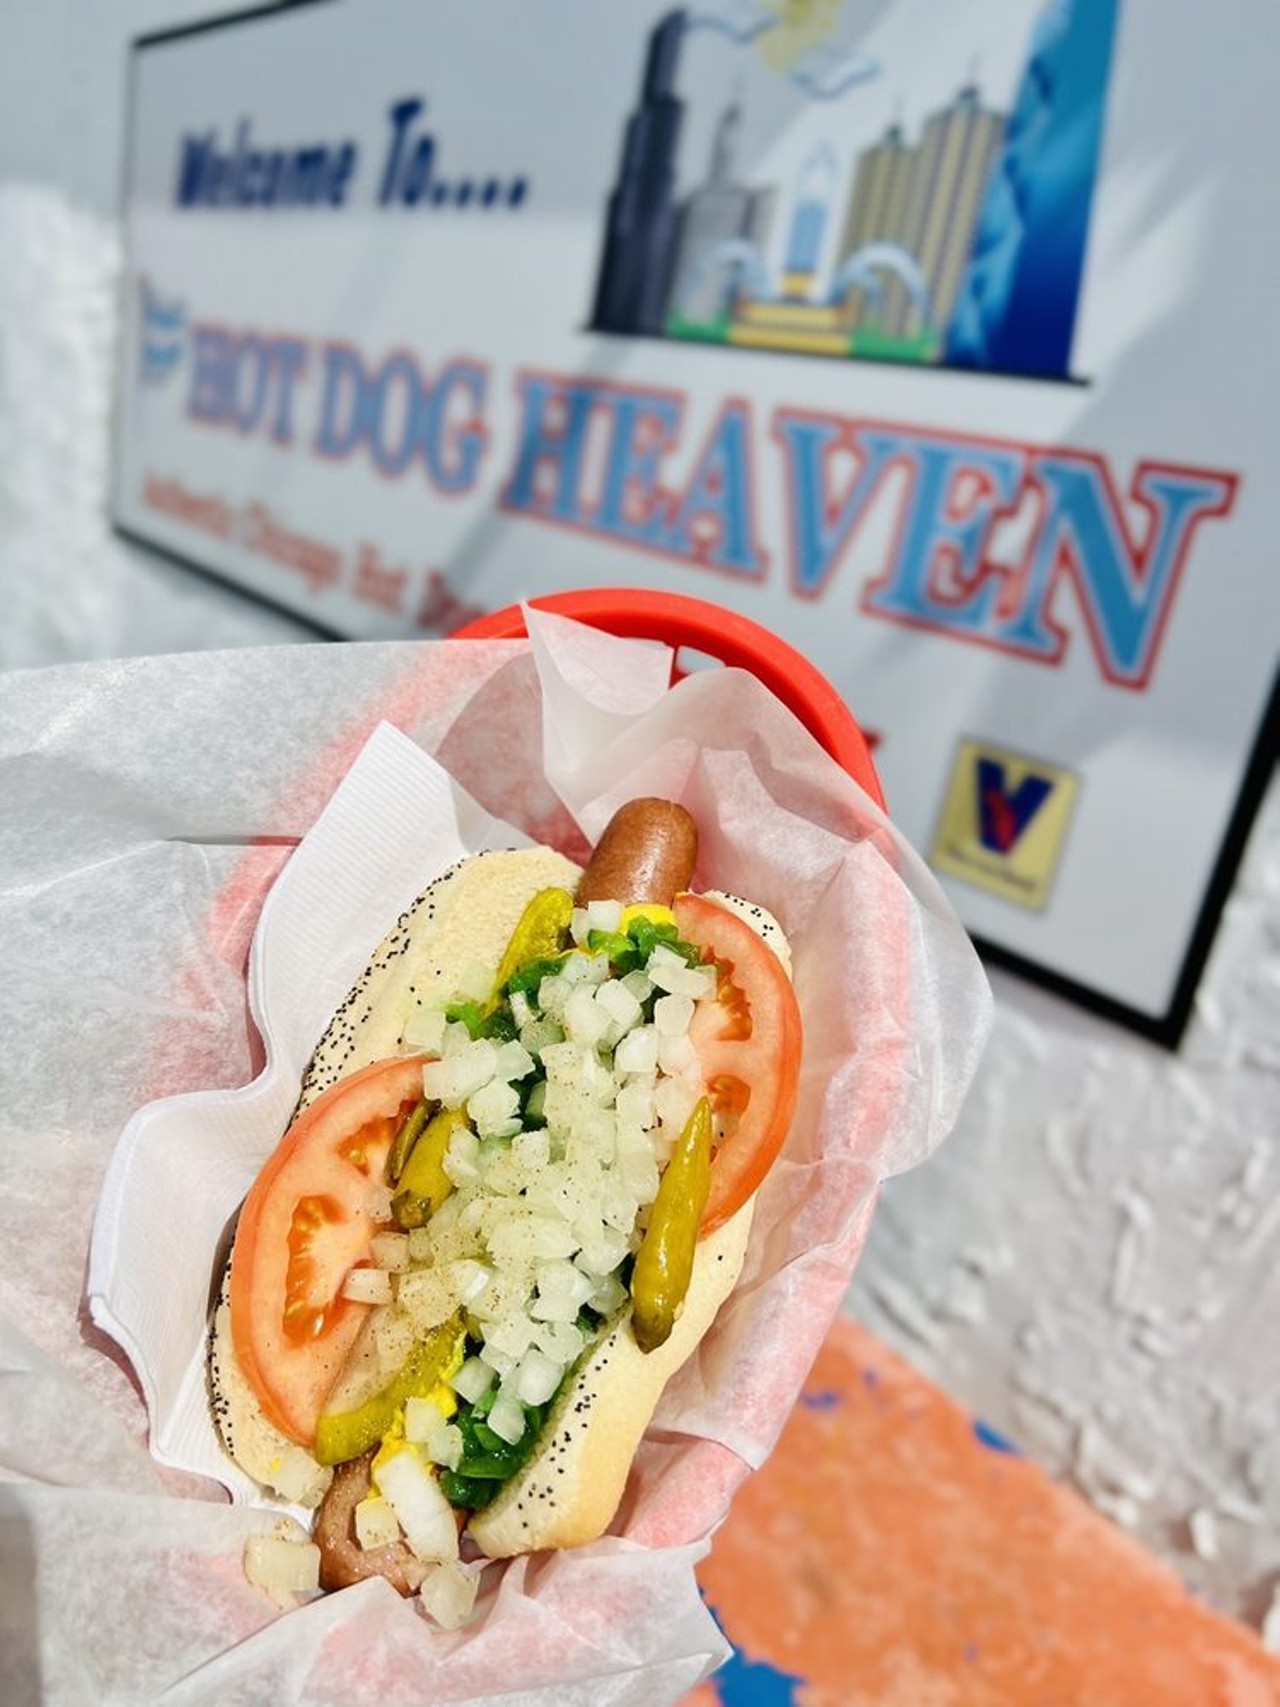 Hot Dog Heaven 
5355 E. Colonial Drive, Orlando
Another Orlando staple, Hot Dog Heaven has been slinging authentic Chicago dogs since 1987, with an unwavering community following for classic dogs.